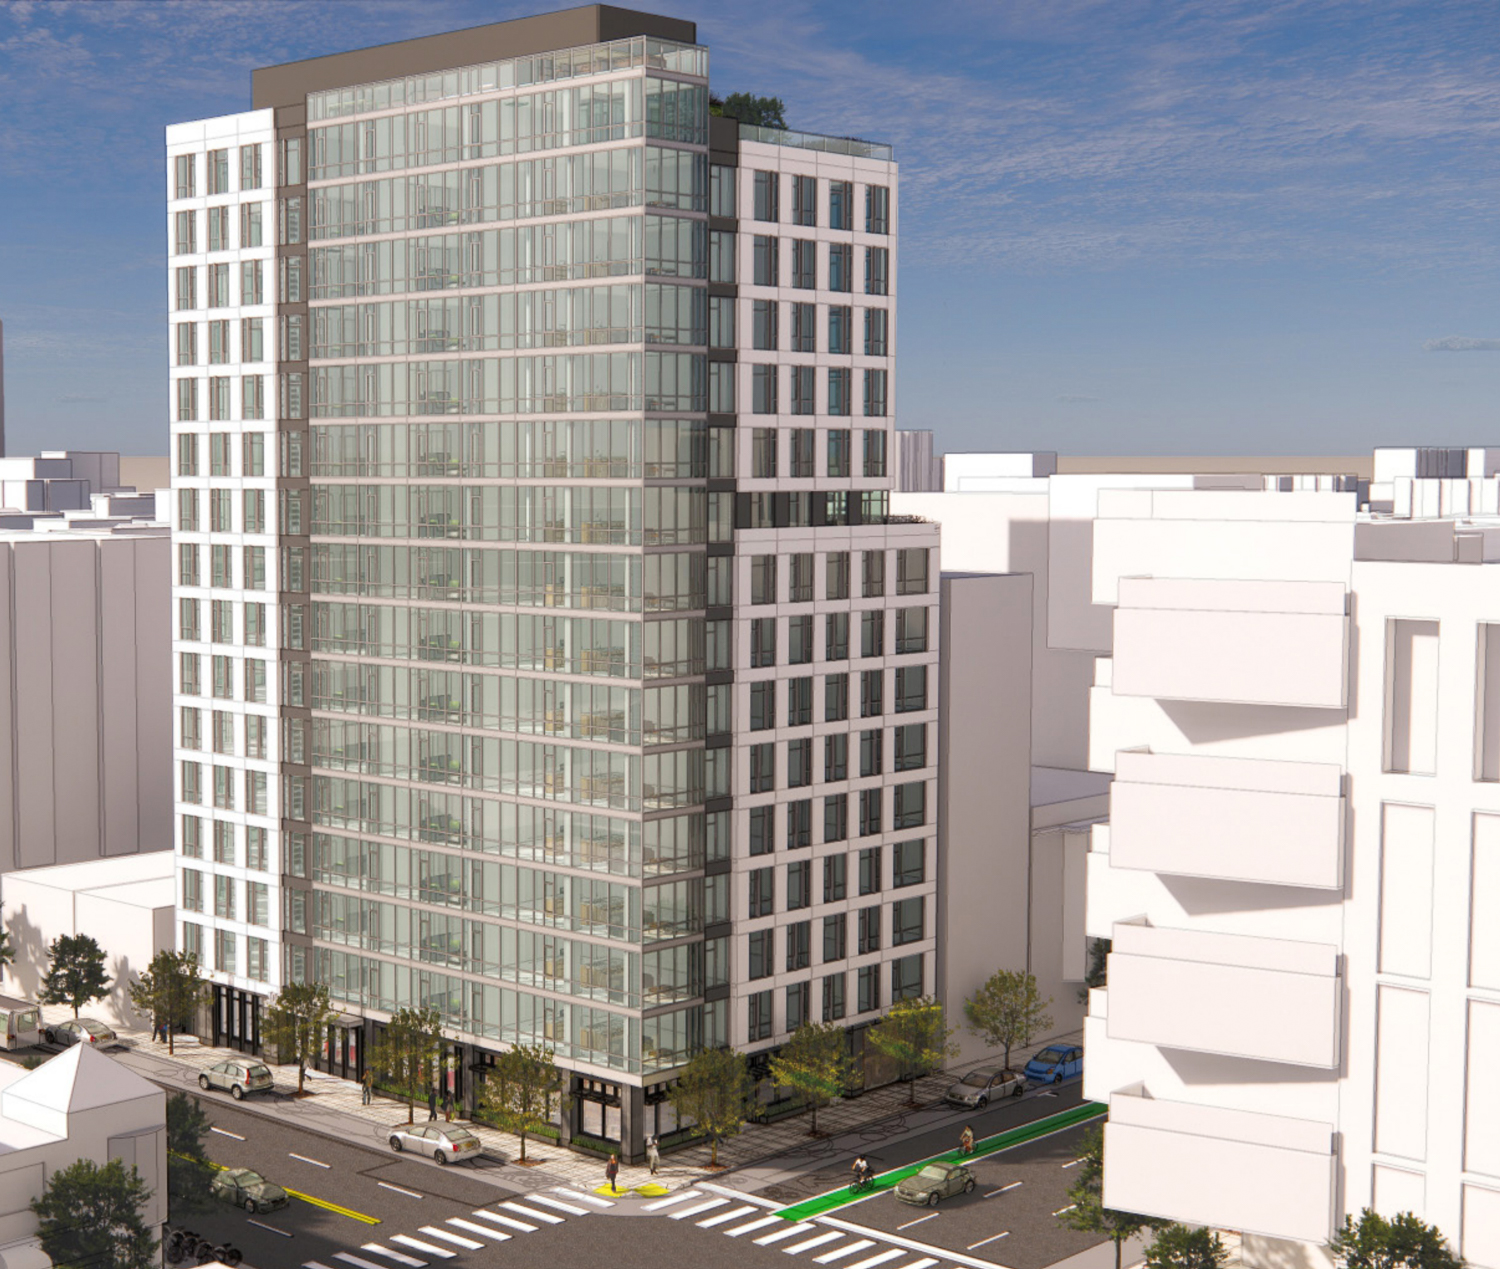 Outdated plans for 300 5th Street aerial view, rendering by TCA Architects